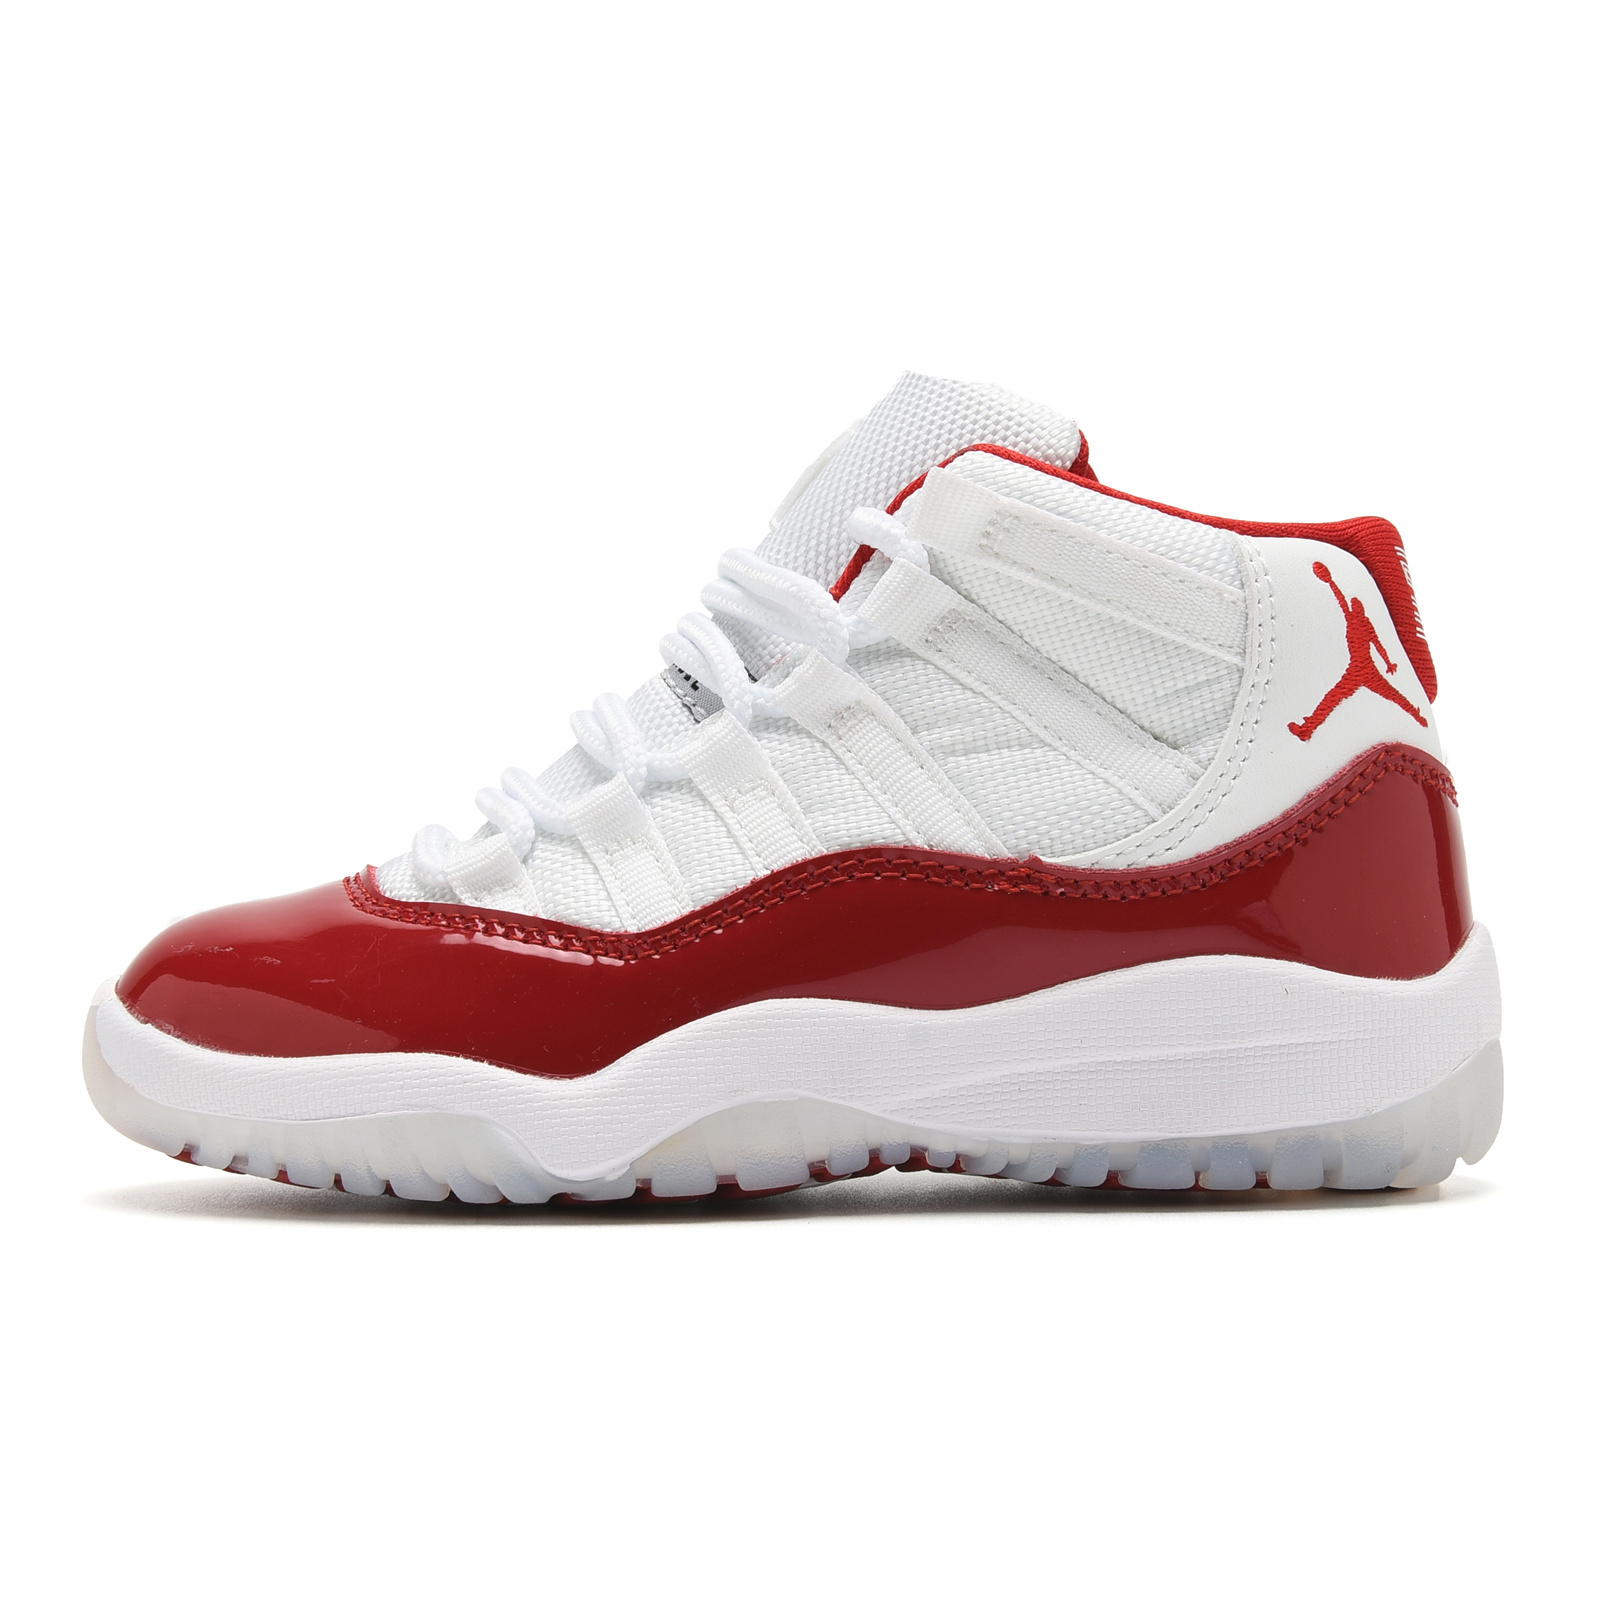 Youth Running Weapon Air Jordan 11 White/Red Shoes 023